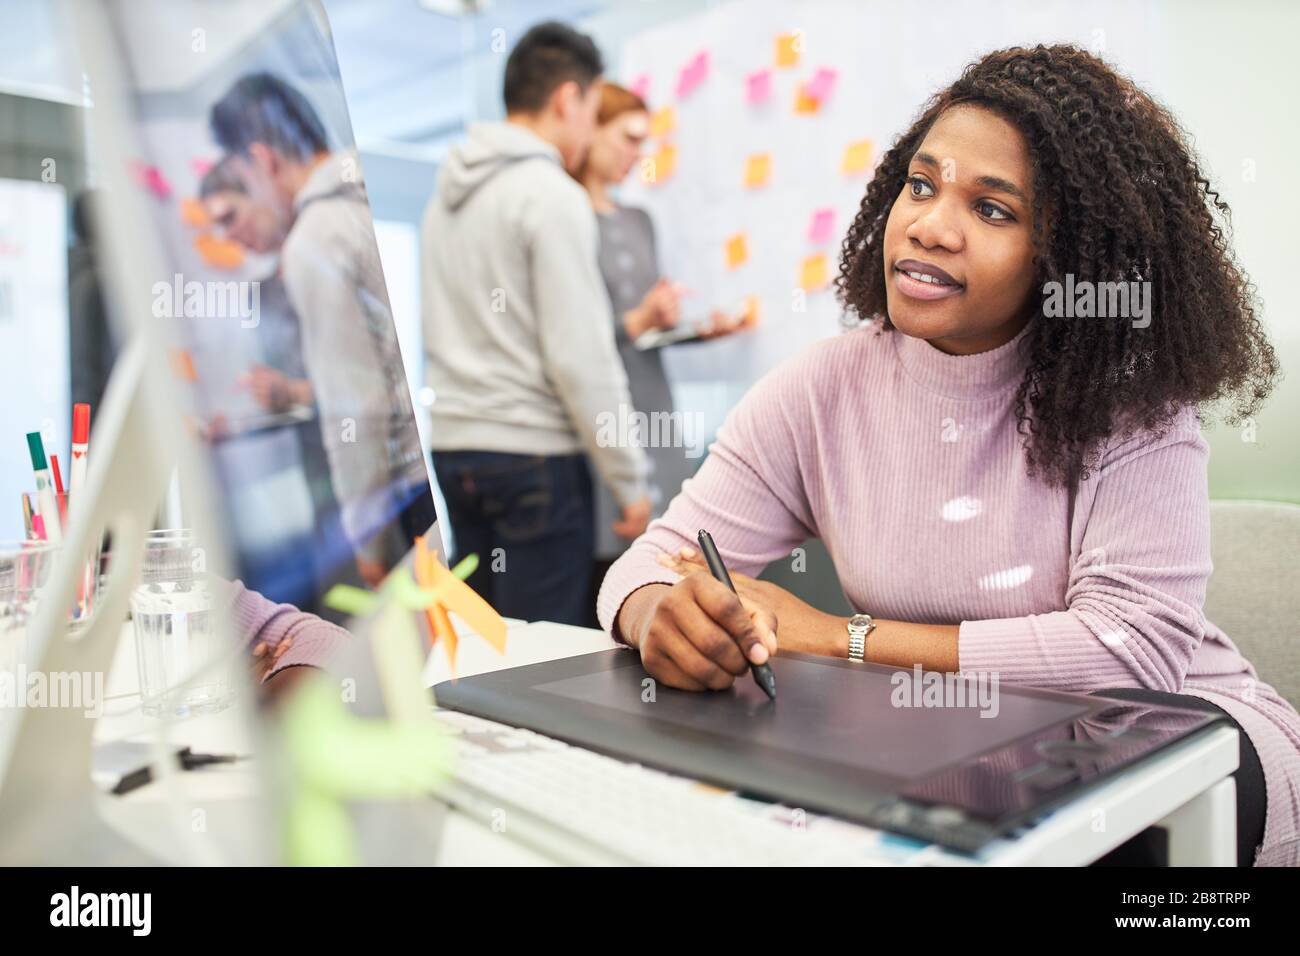 African woman as a graphic designer uses the pen to design a layout on a tablet computer Stock Photo